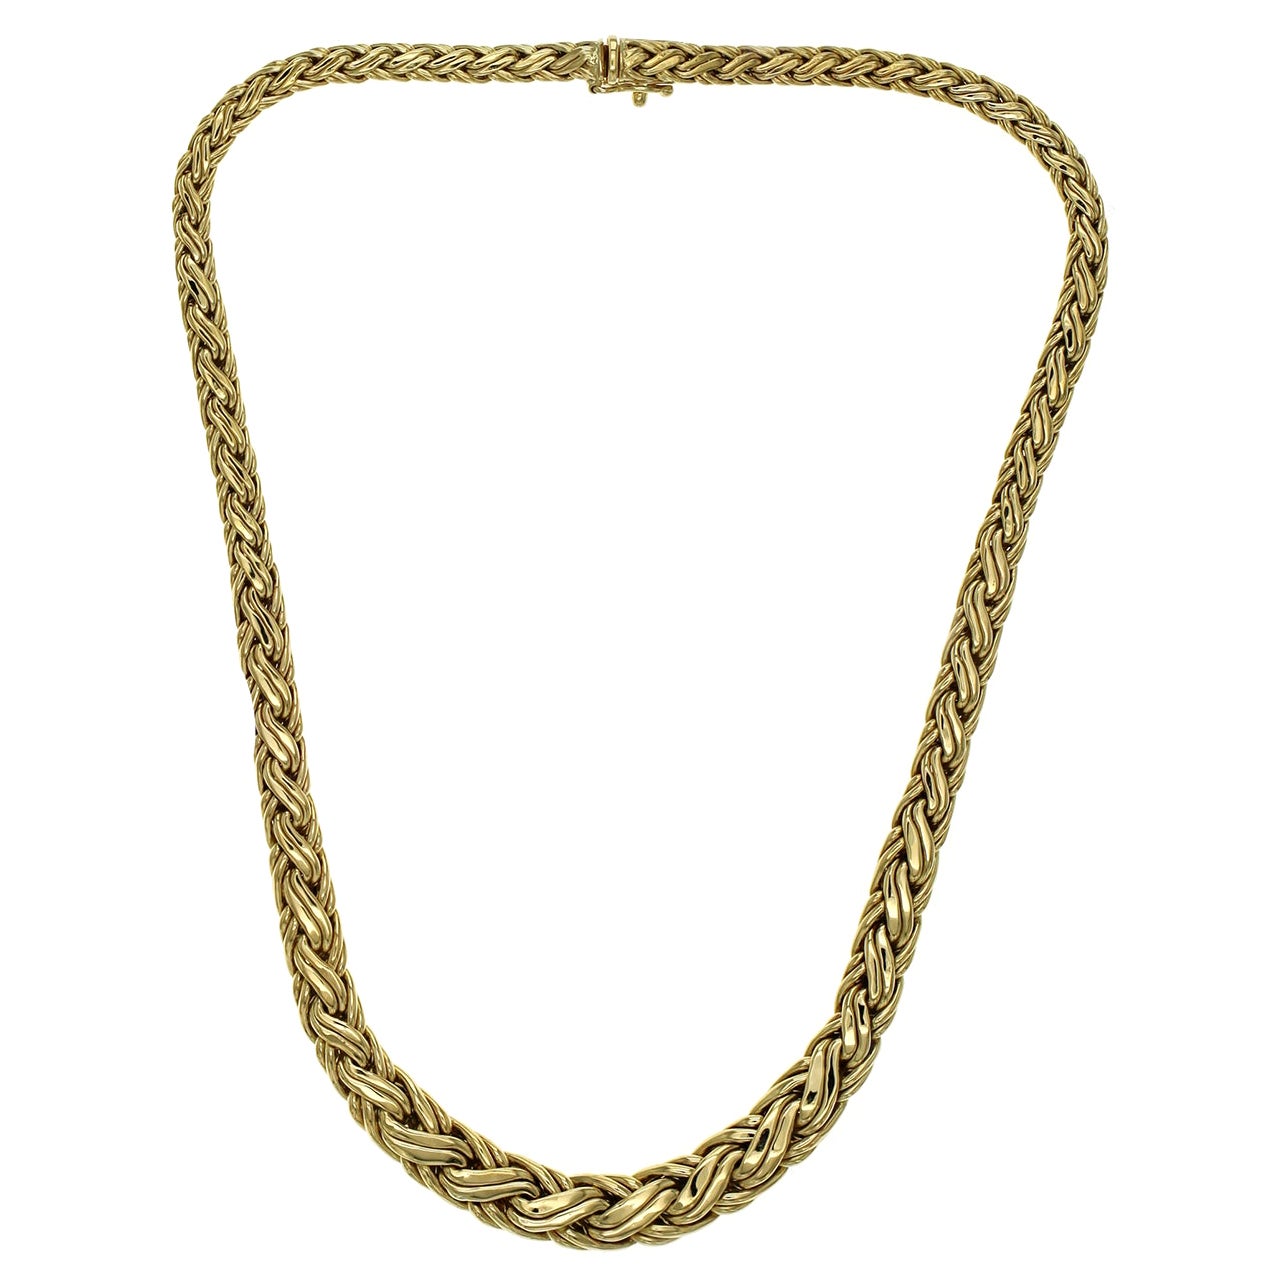 Tiffany & Co. 18k Yellow Gold Graduated Braided Necklace